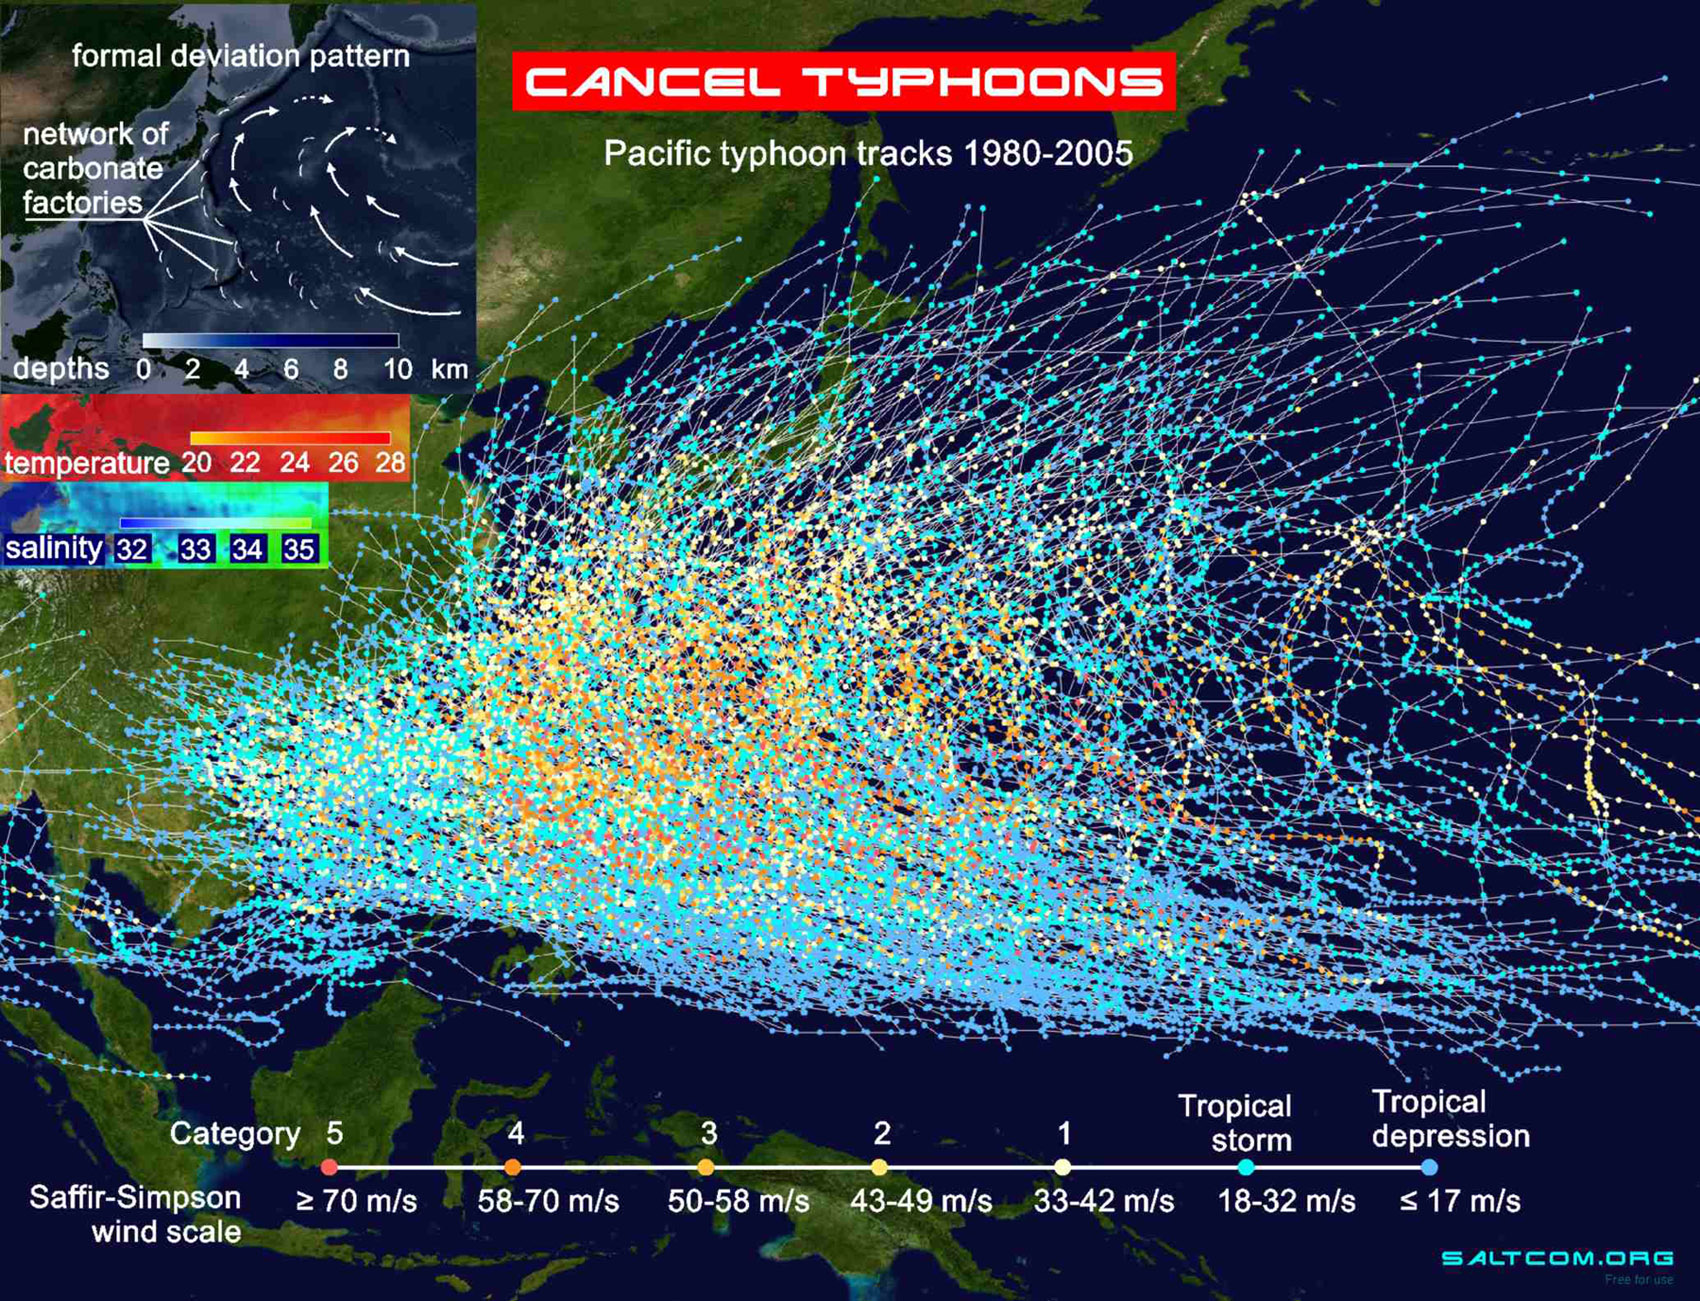 CANCEL TYPHOONS. 
The map shows the typhoon tracks 1980-2005.
Network artificial carbonate factories, deviation pattern. 
Salinity seawater, wind speed scale, m/s
SALTCOM.ORG
We can STOP GLOBAL WARMING and prevent many natural disasters.
 